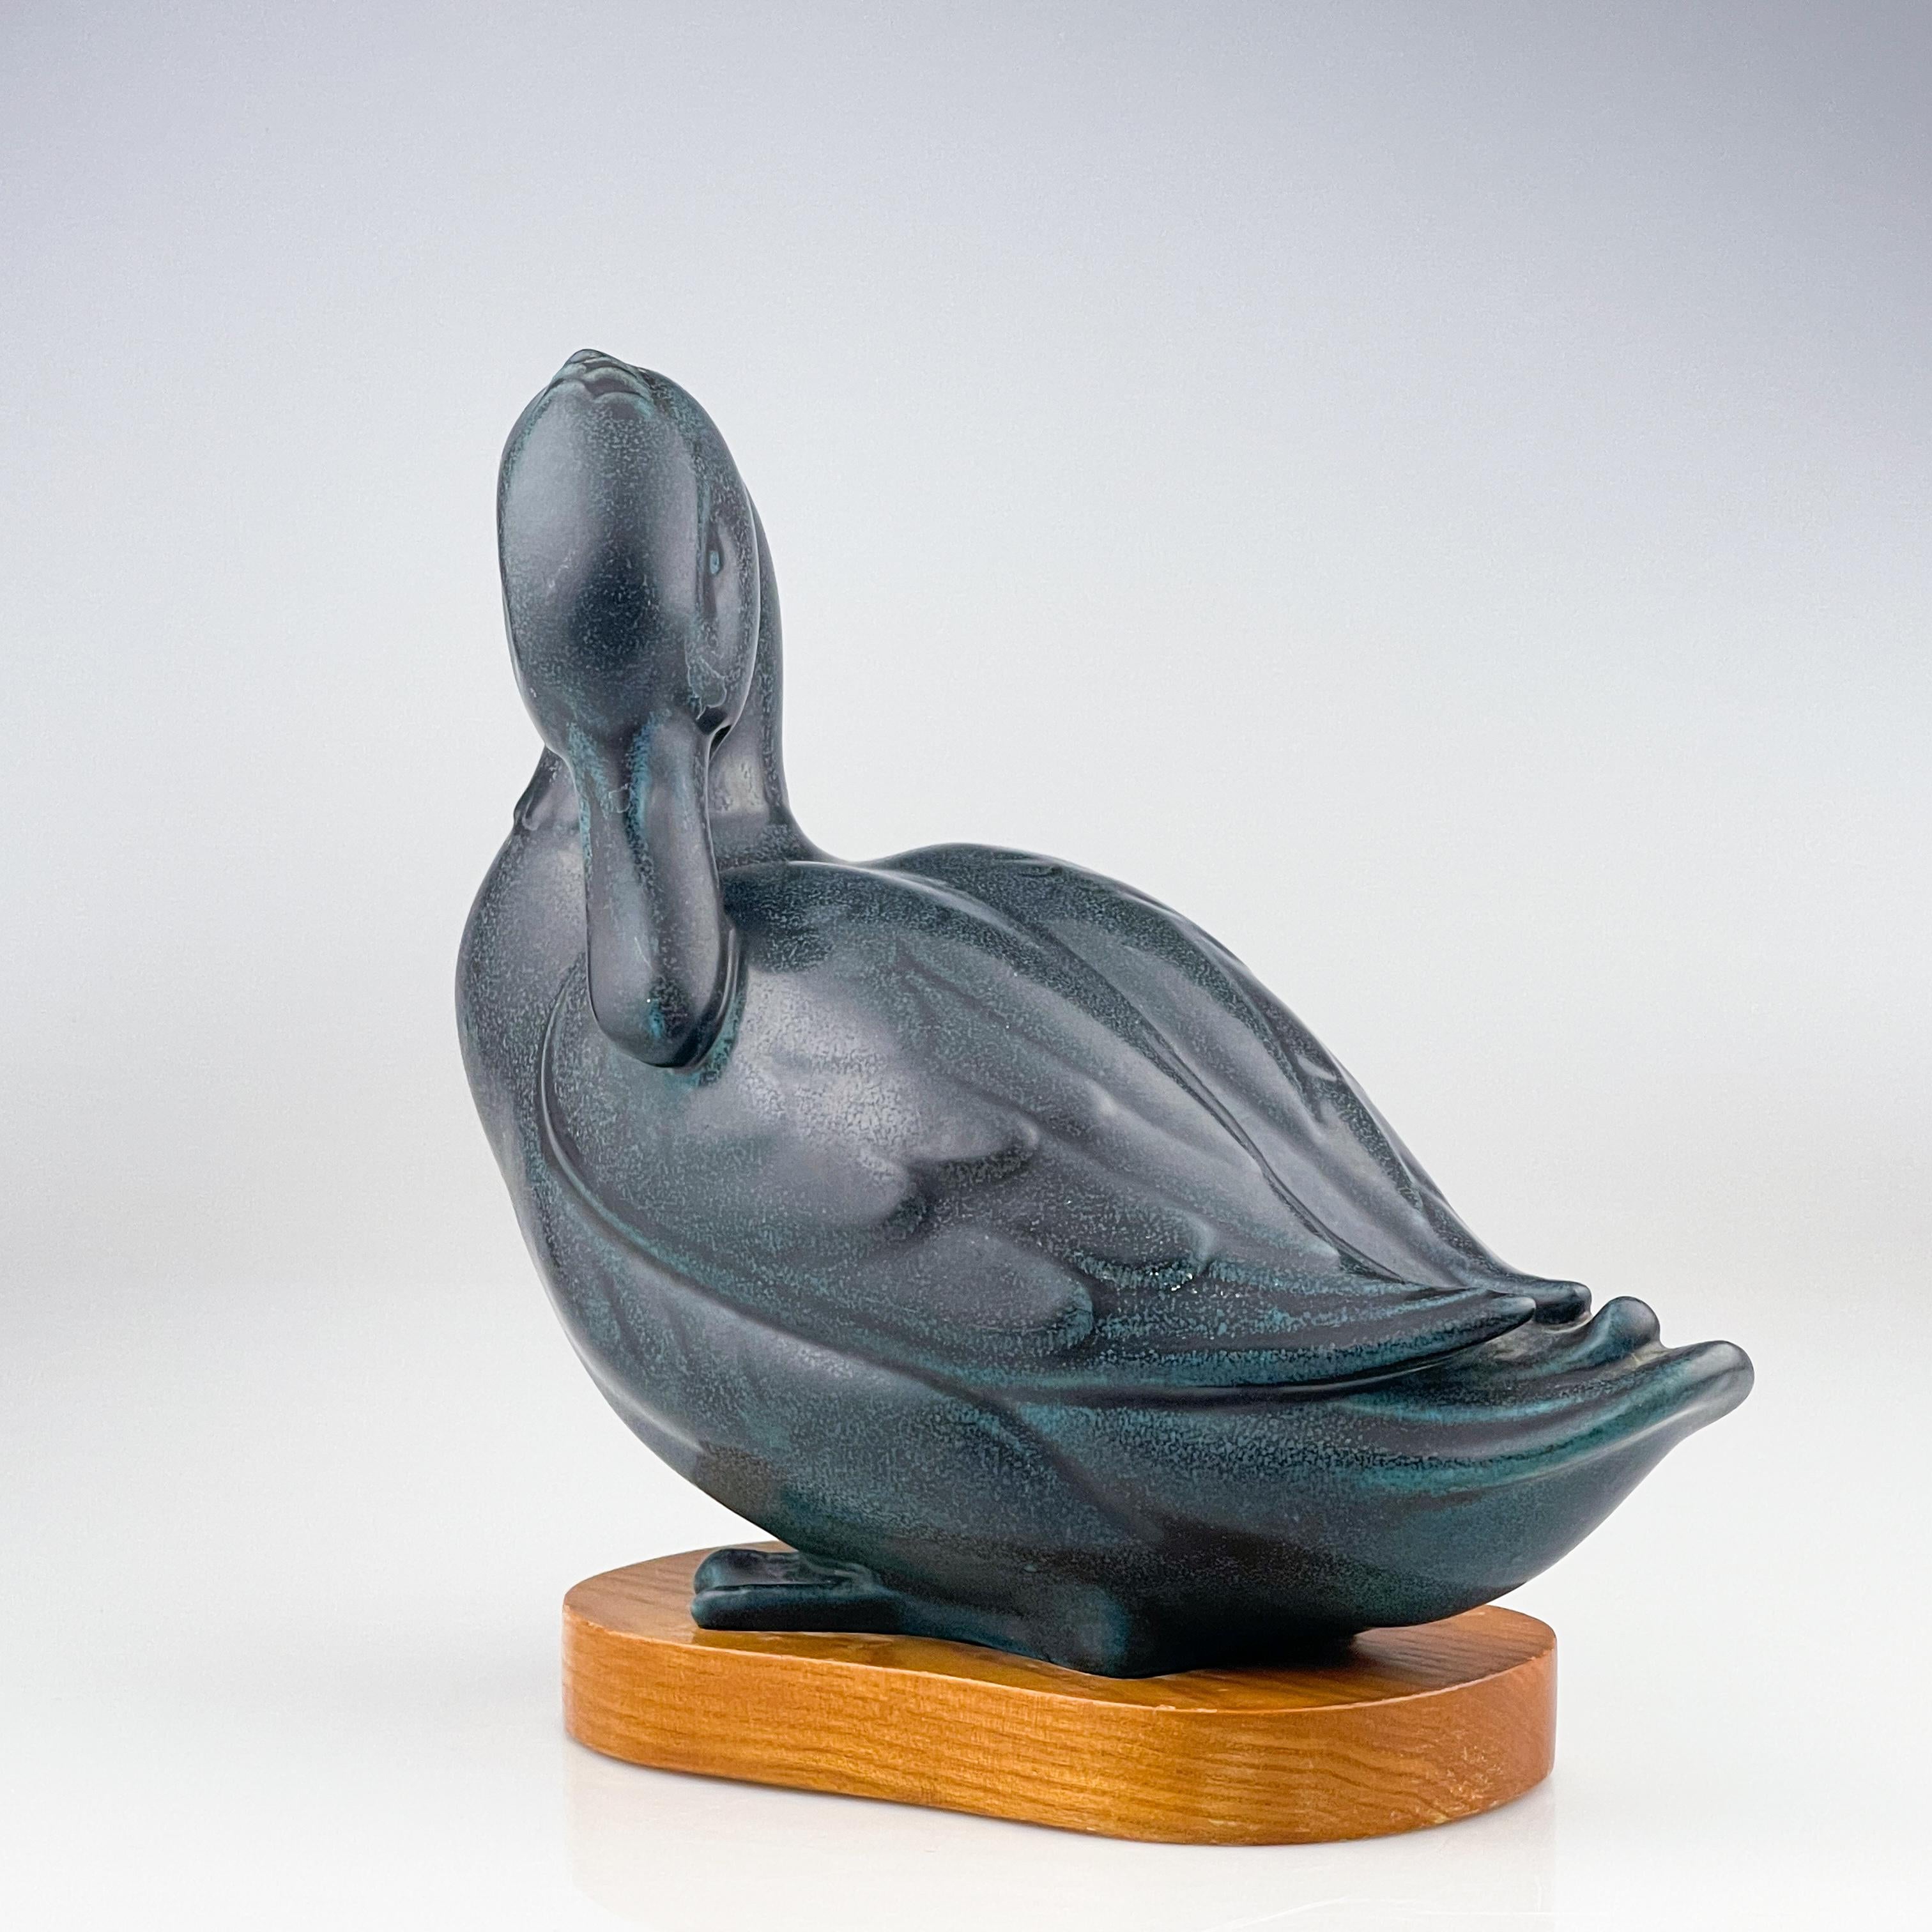 Gunnar Nylund, Stoneware Sculpture of a Duck, Rörstrand, Sweden, circa 1950

Description
A stoneware sculpture of a Duck, finished in blue and green glazes on it’s original lacquered wooden base. Made in a limited edition of 200 pieces.

Gunnar